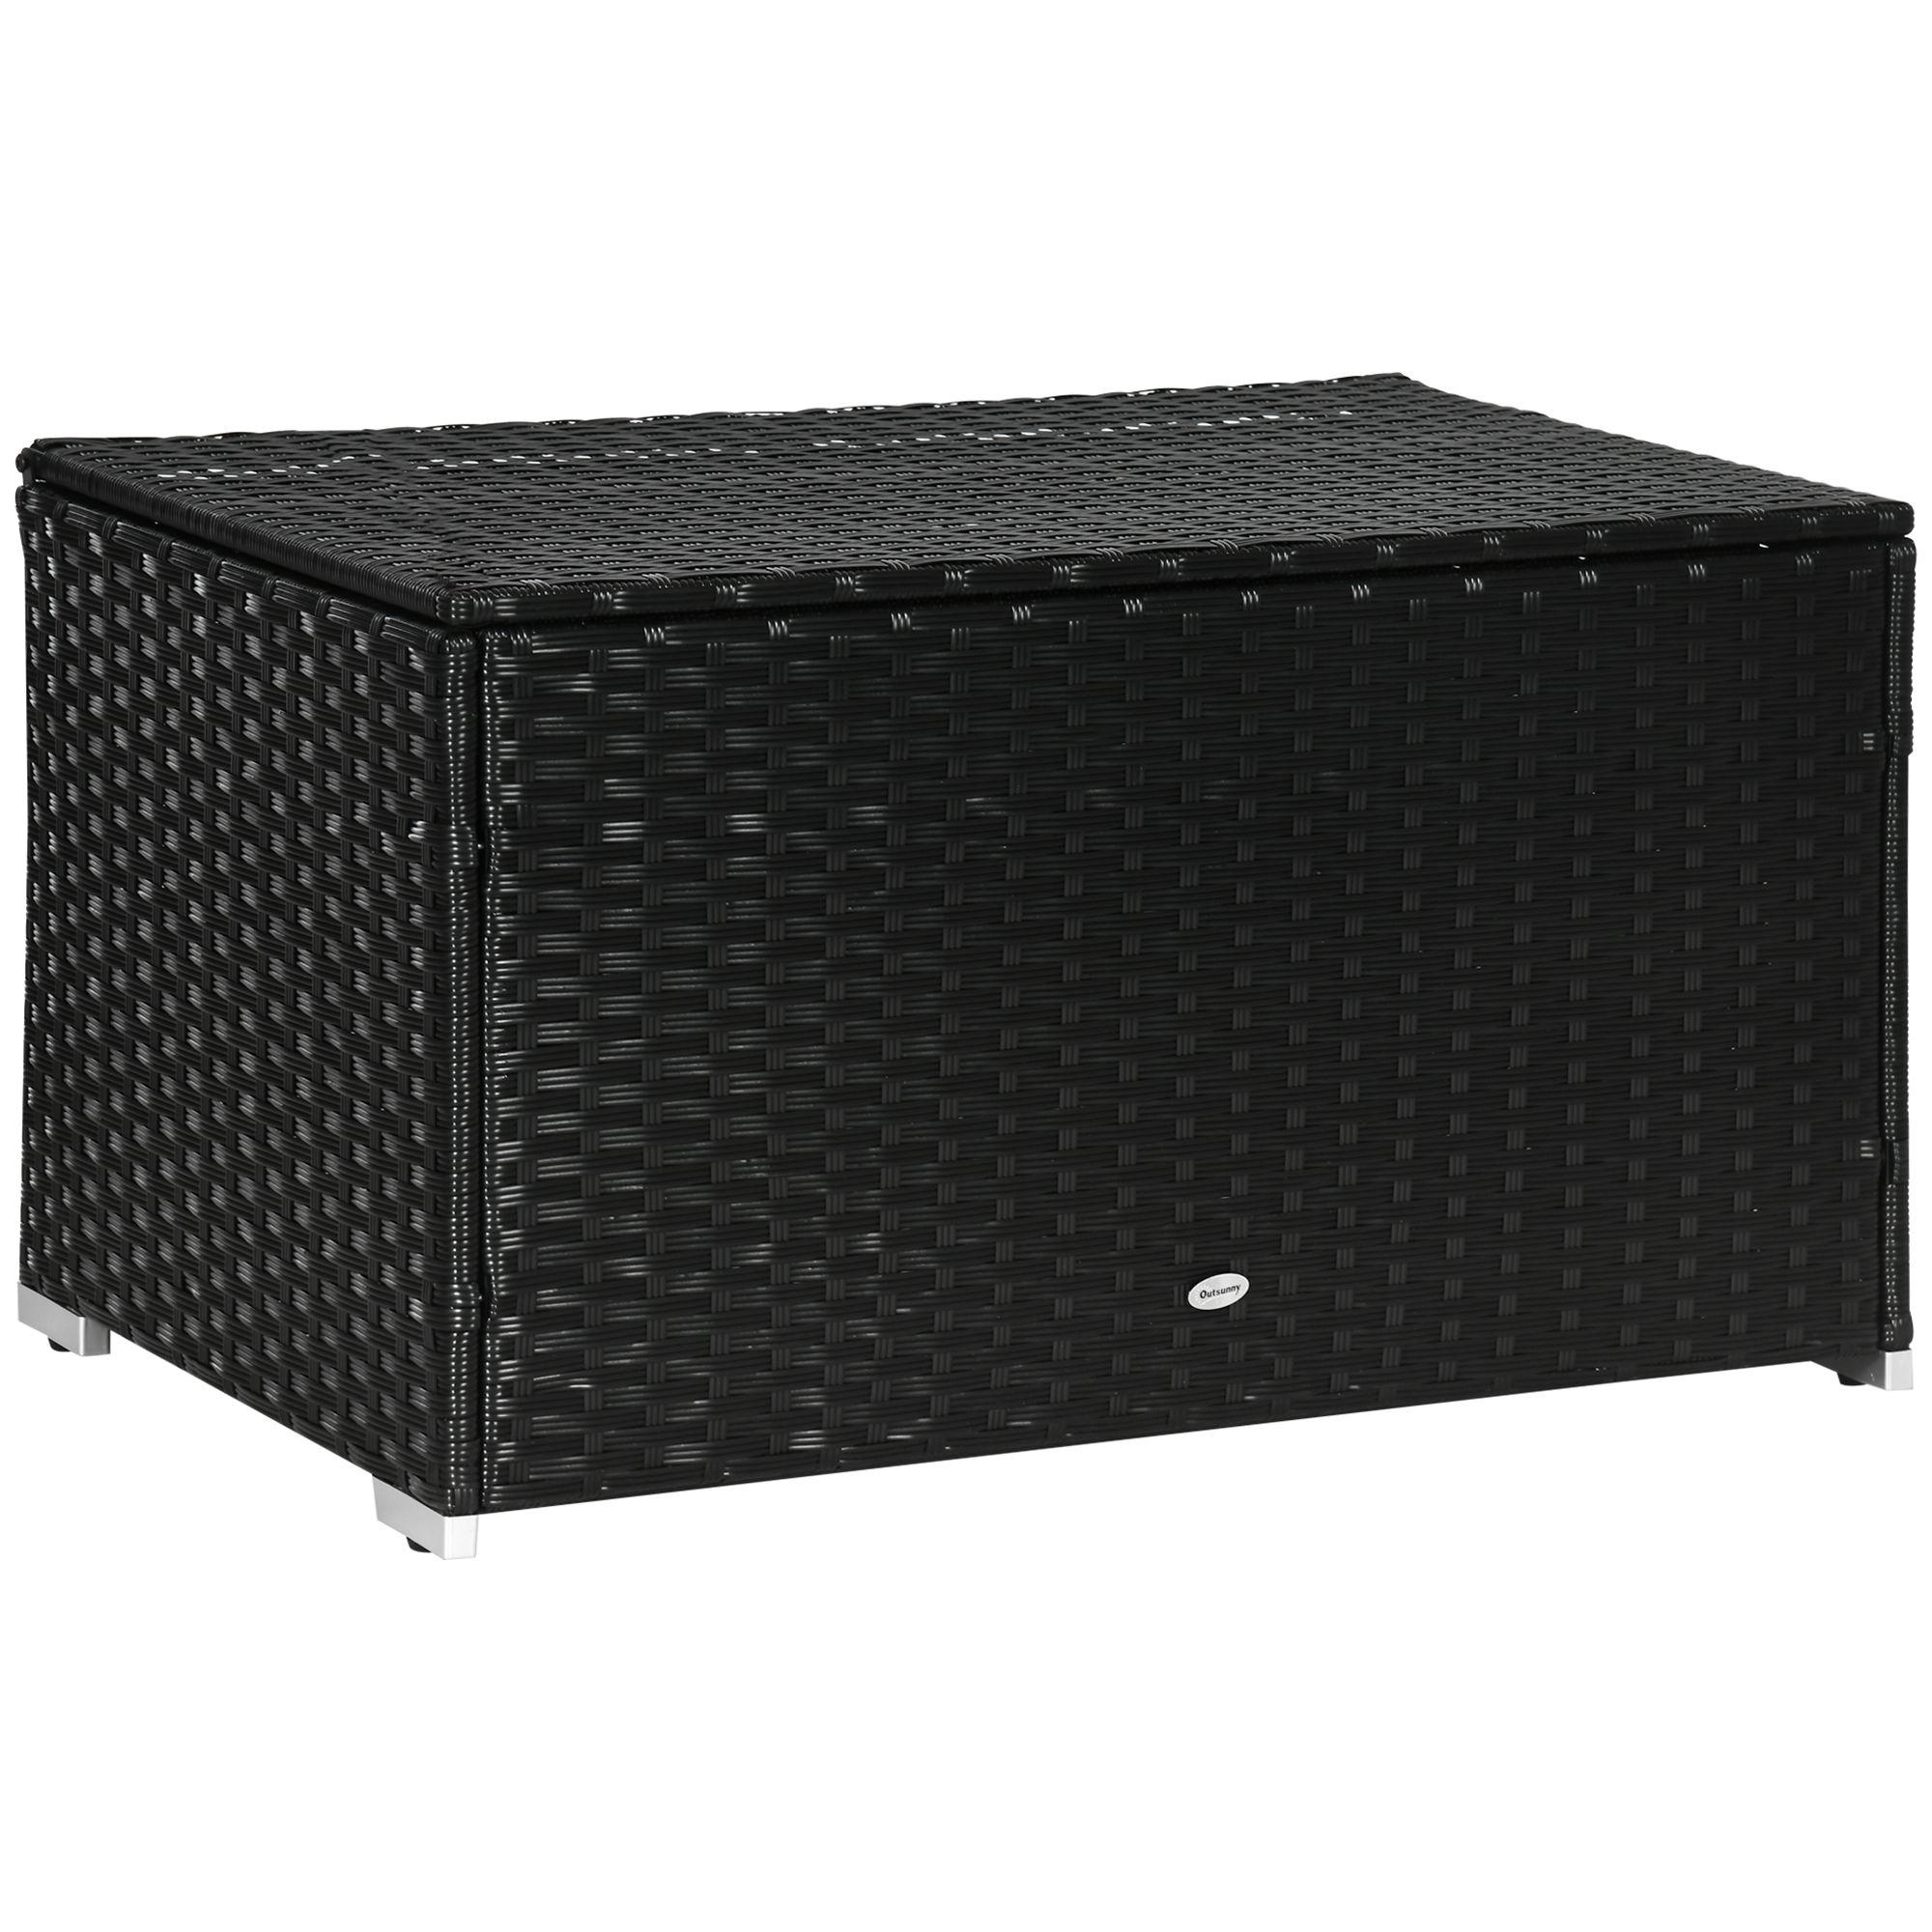 Outsunny Rattan and Steel Garden Storage Box με Καπάκι